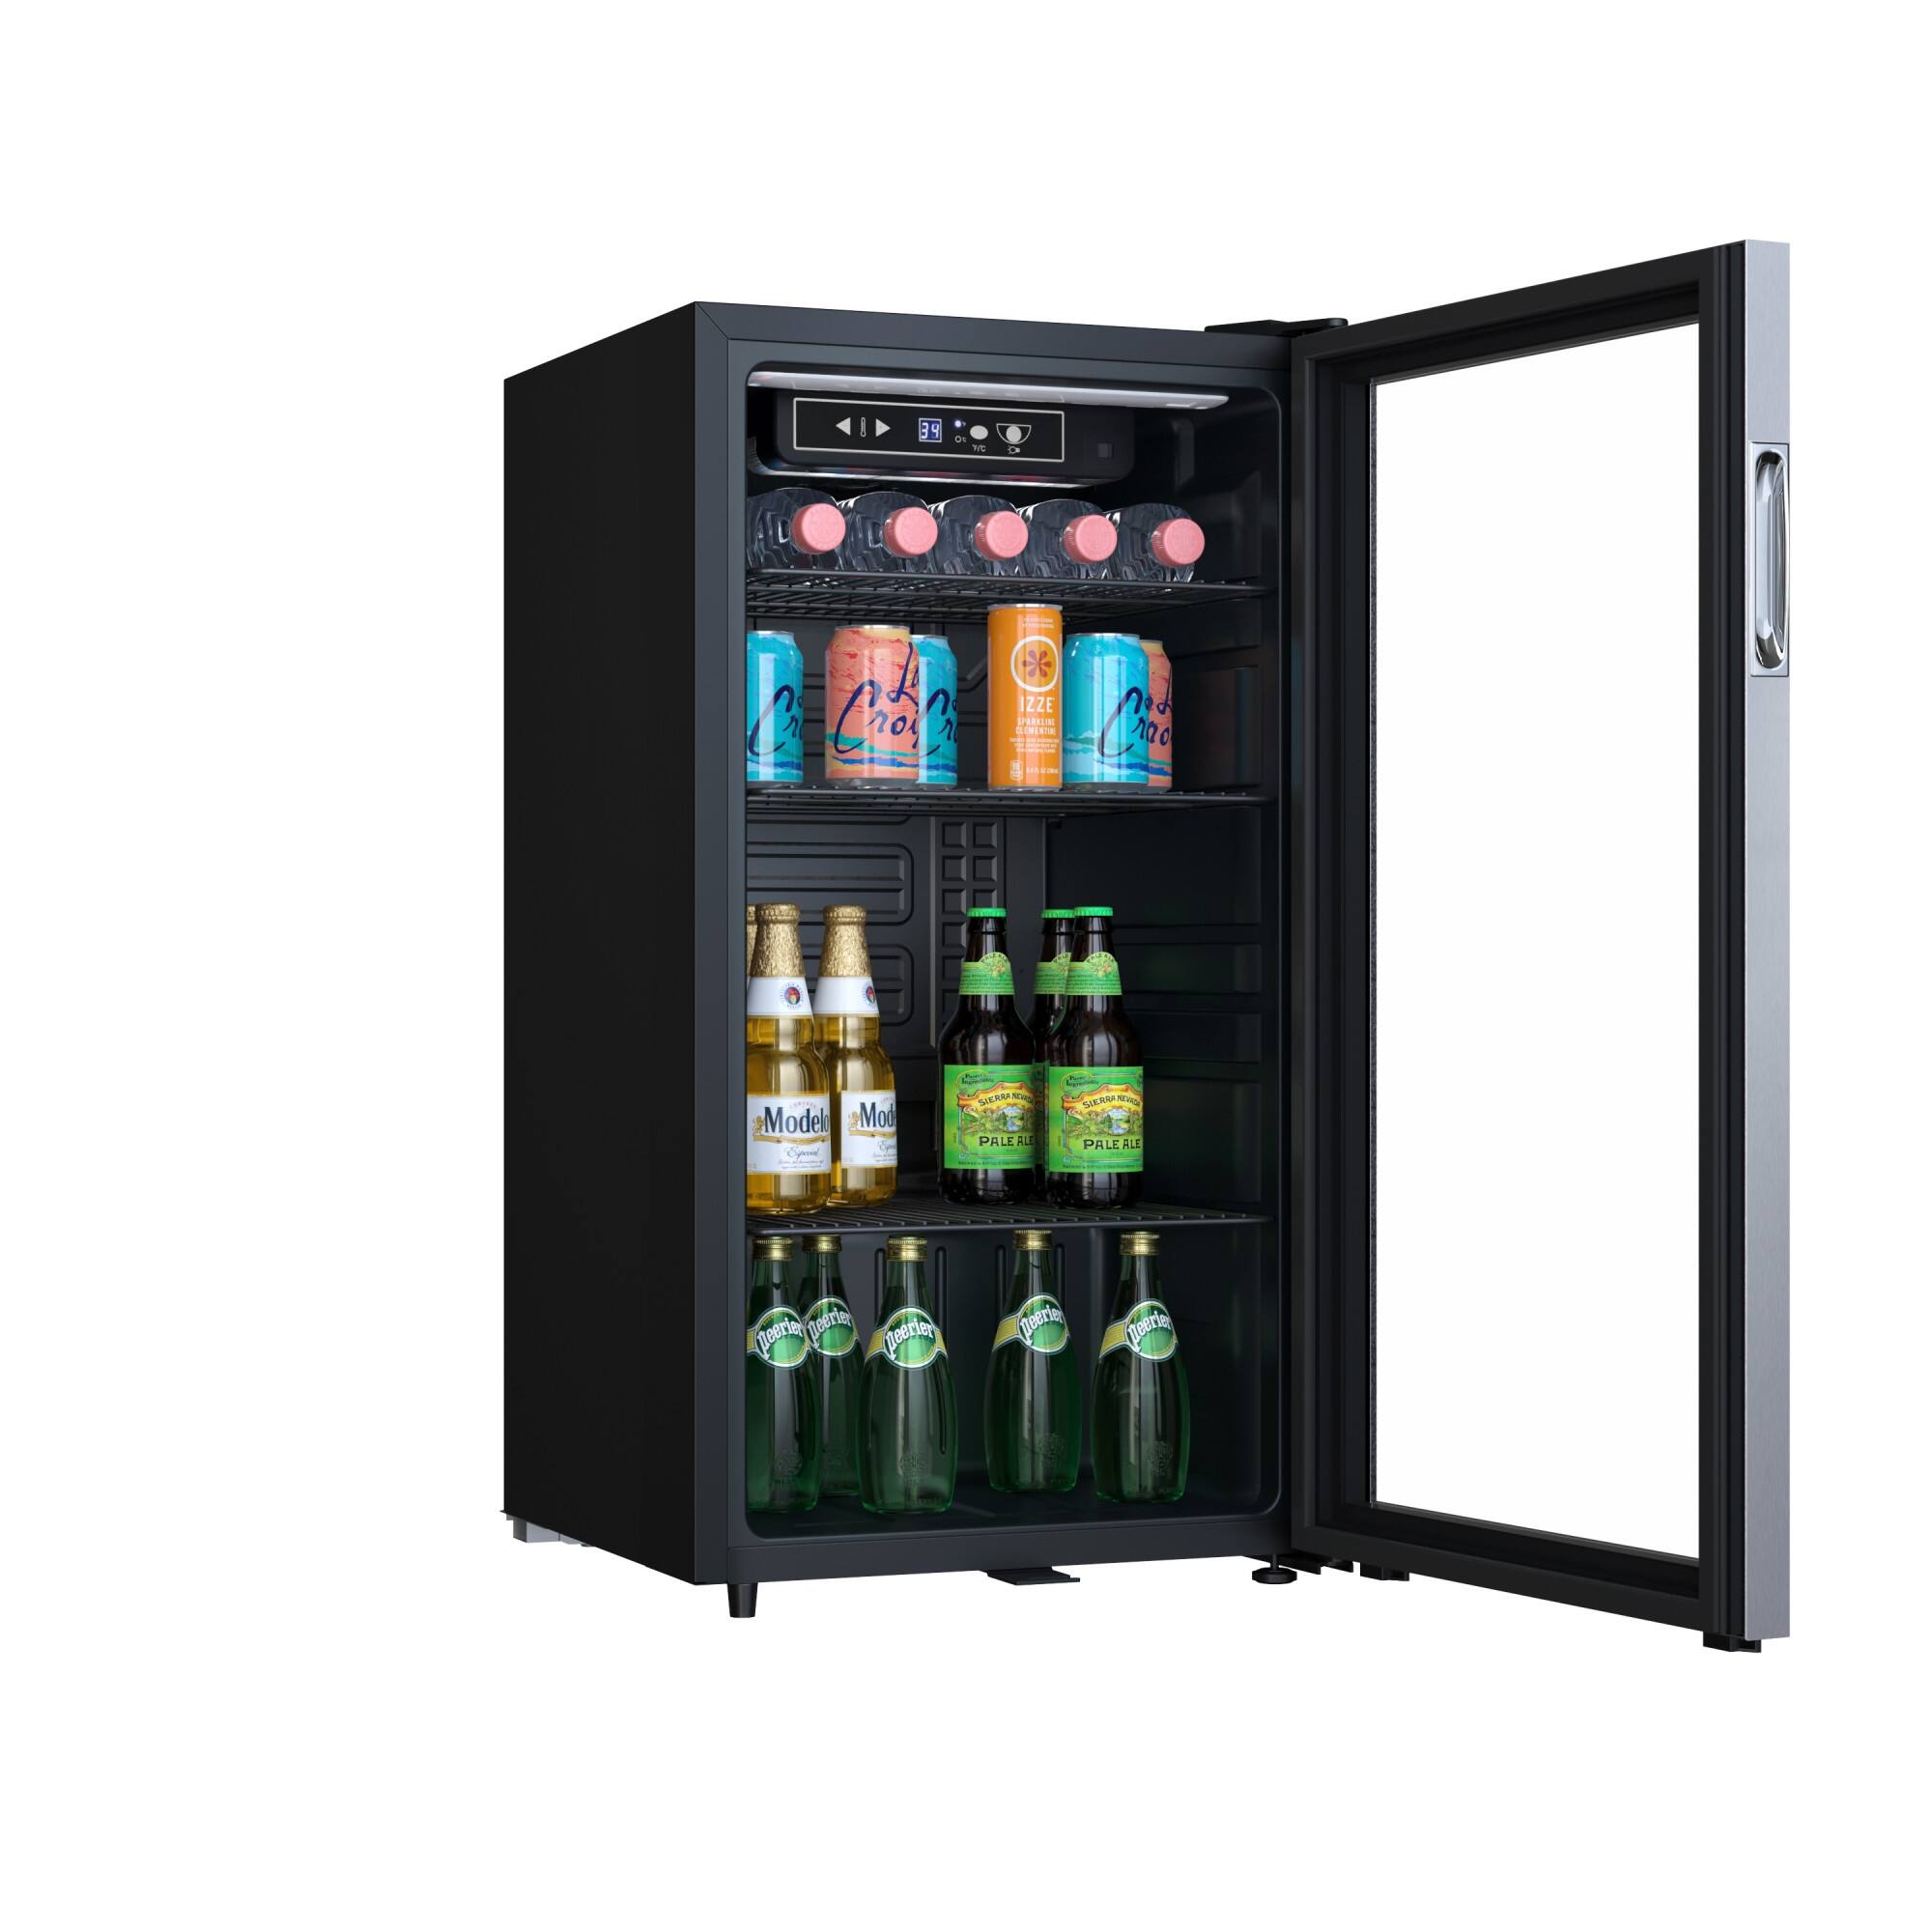 EdgeStar 18 Inch Wide 80 Can Capacity Ultra Low Temp Beverage Center